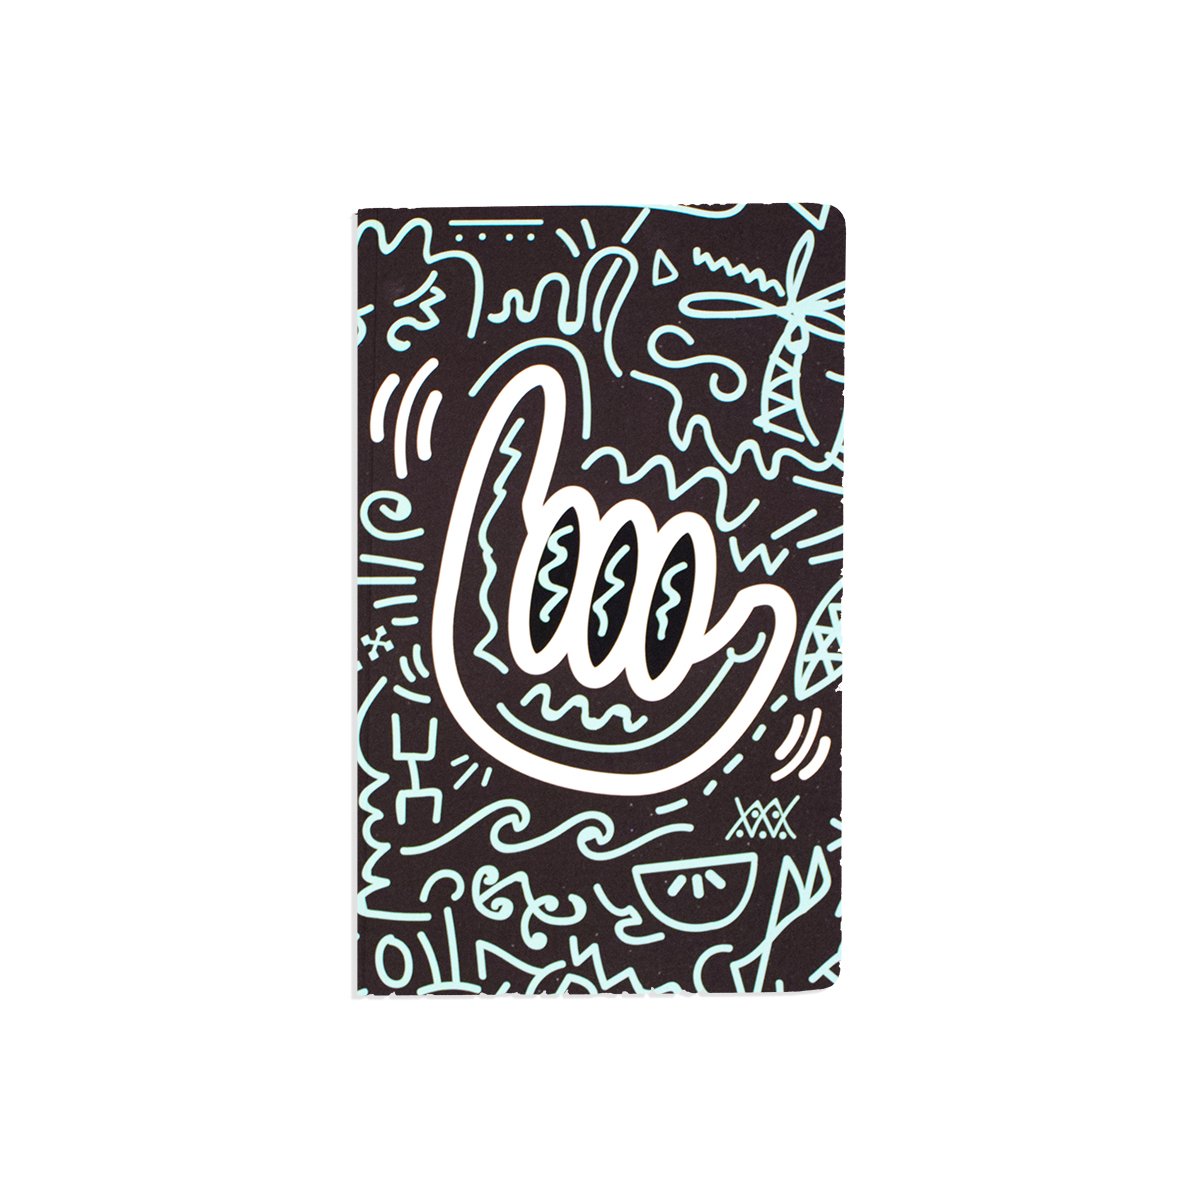 5" x 8.25" soft cover black notebook with large shaka illustration in white and various blue lines and shapes representing surf culture